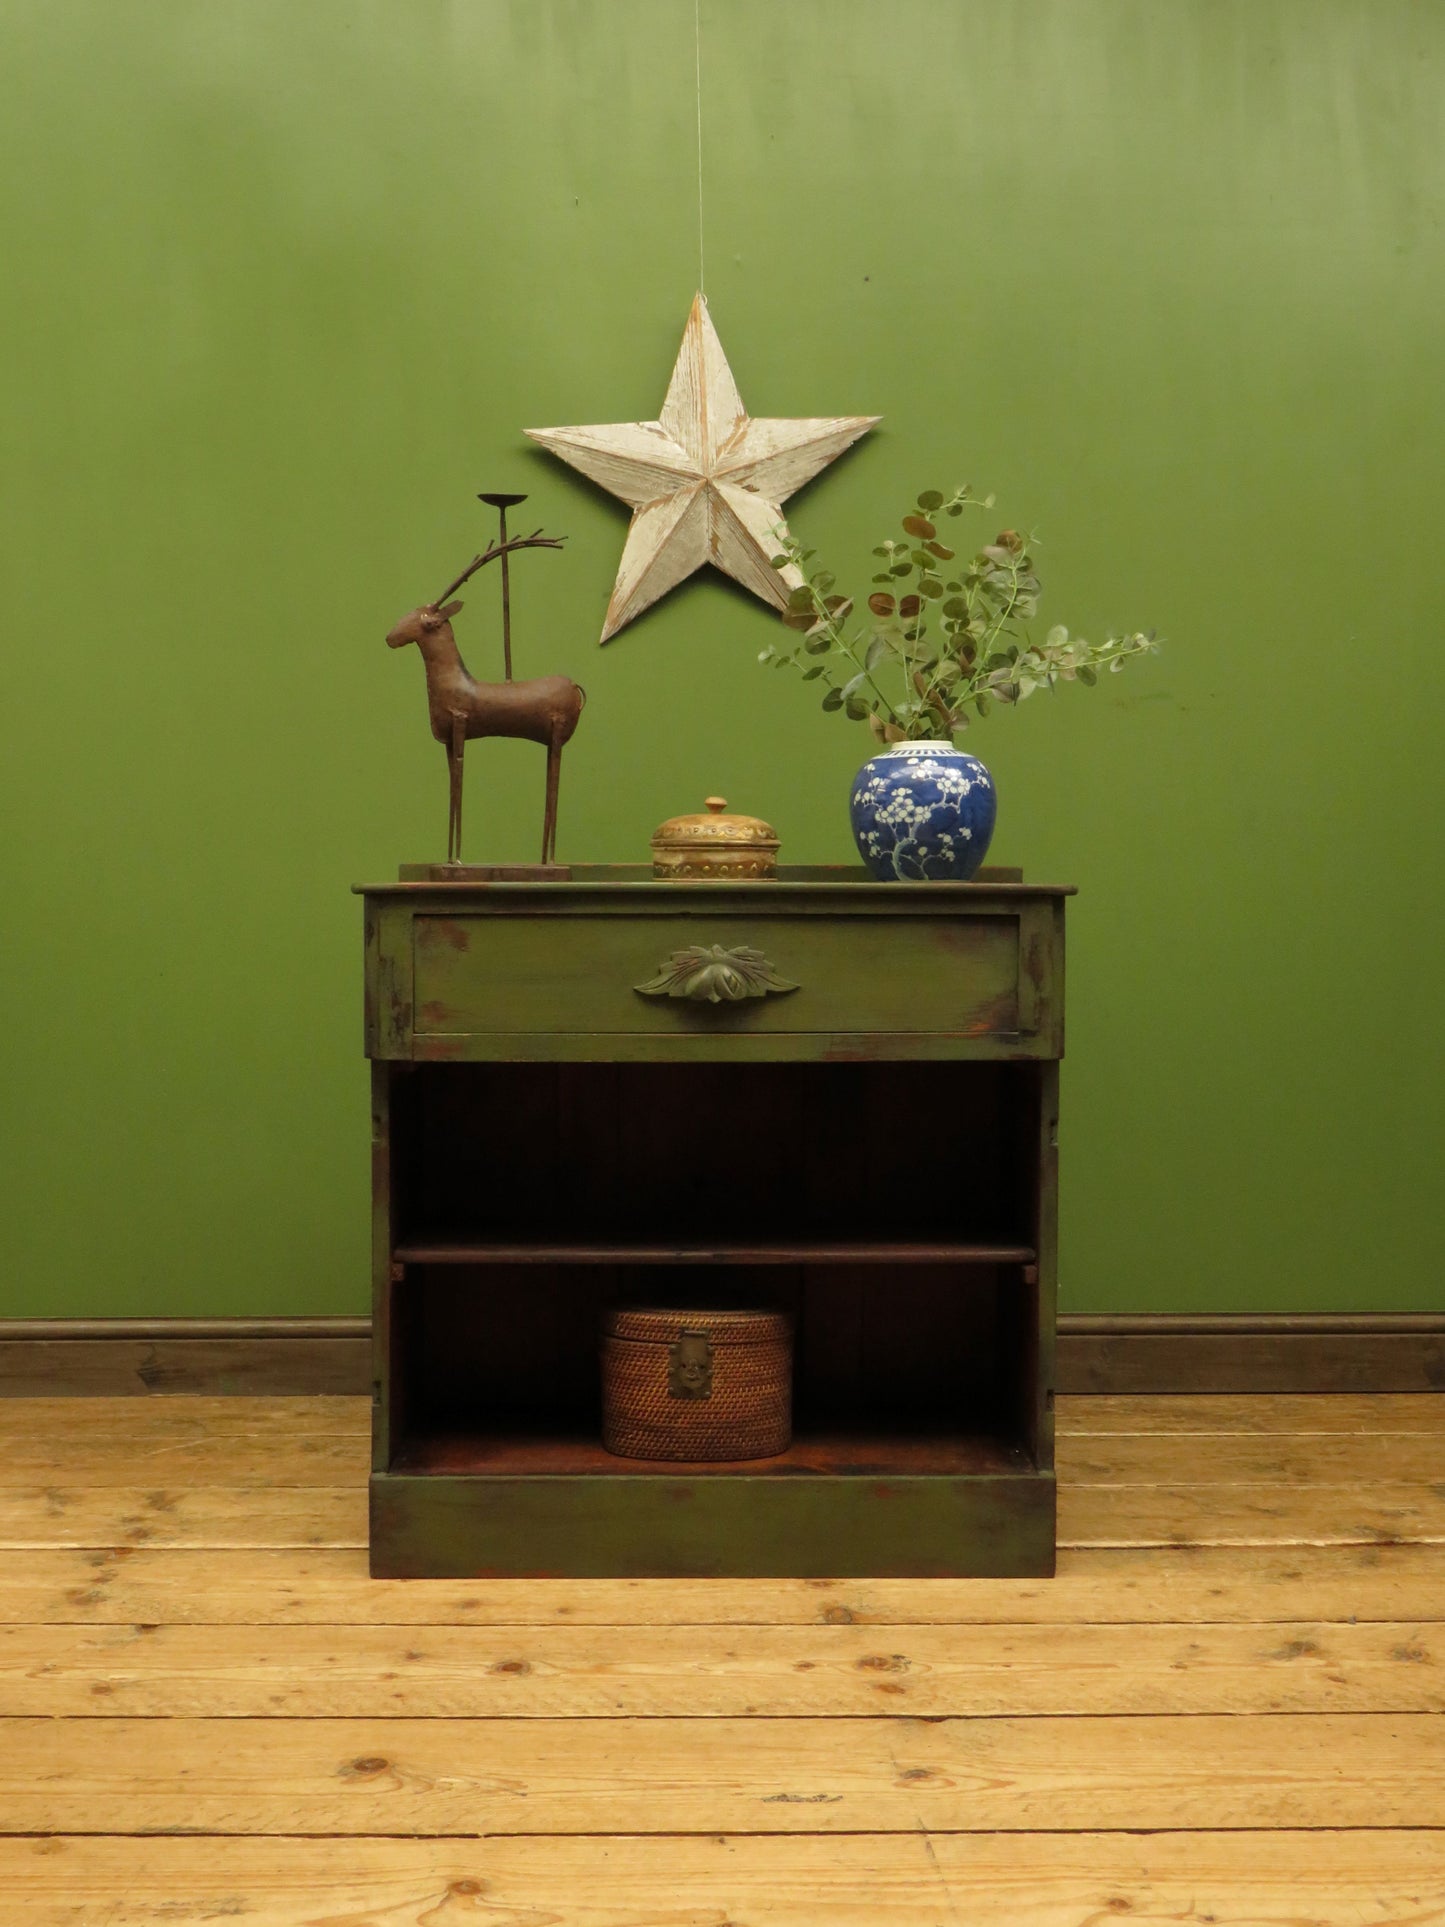 Bohemian Green Painted Cabinet with Drawer